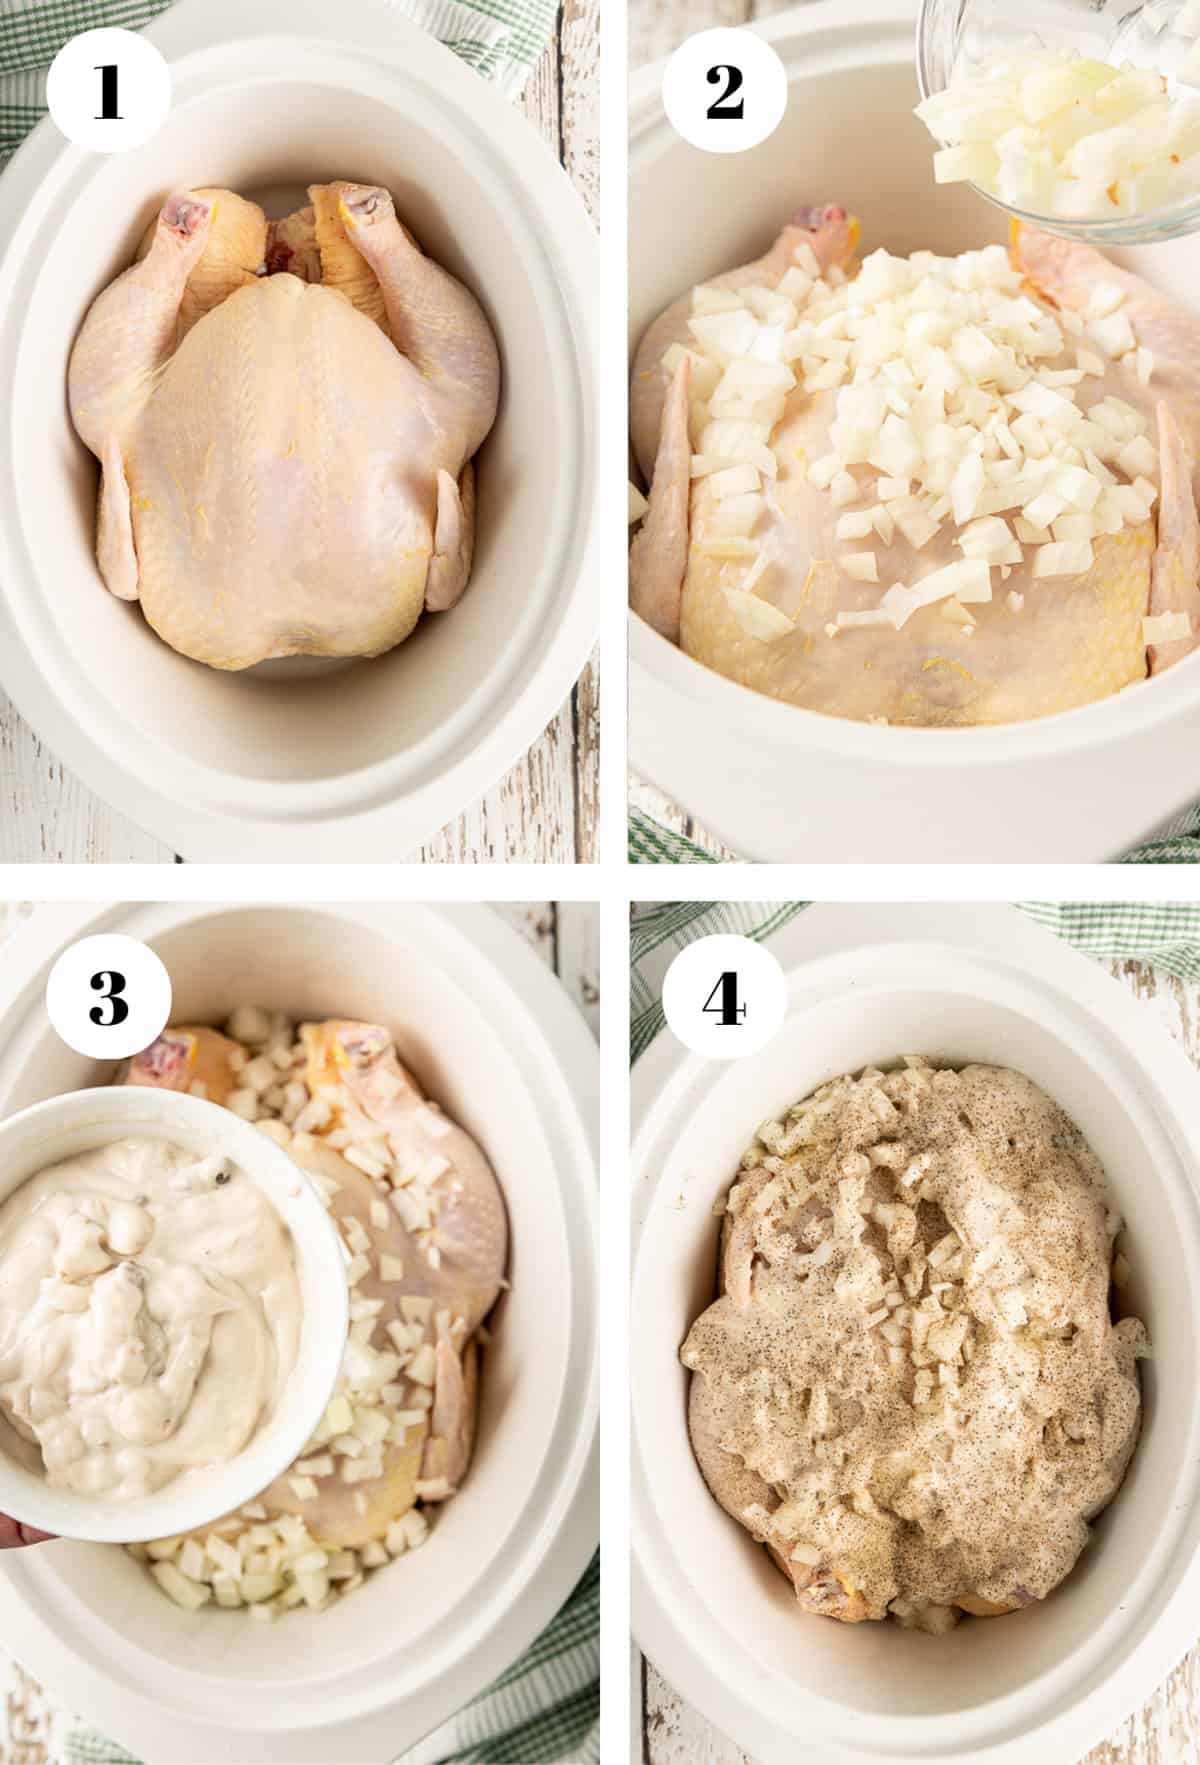 Adding ingredients to a whole chicken in a crock pot.